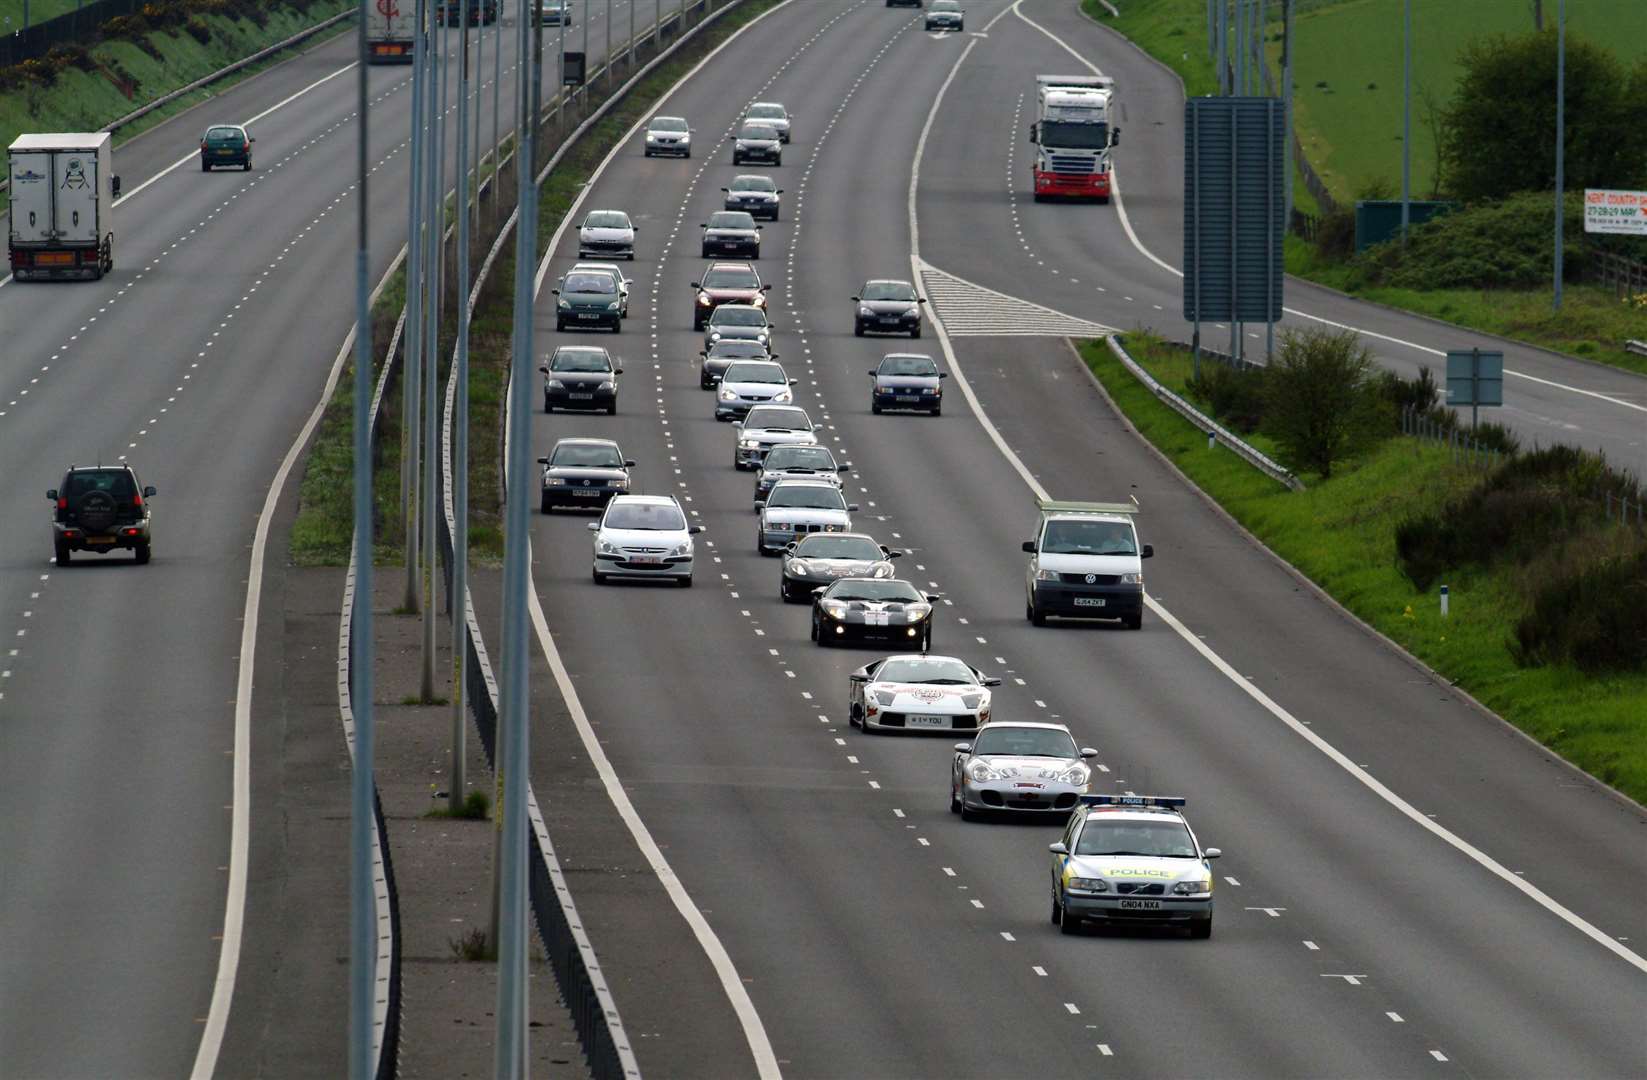 Police keep an eye on the Gumball Rally entrants on the M20 in 2006